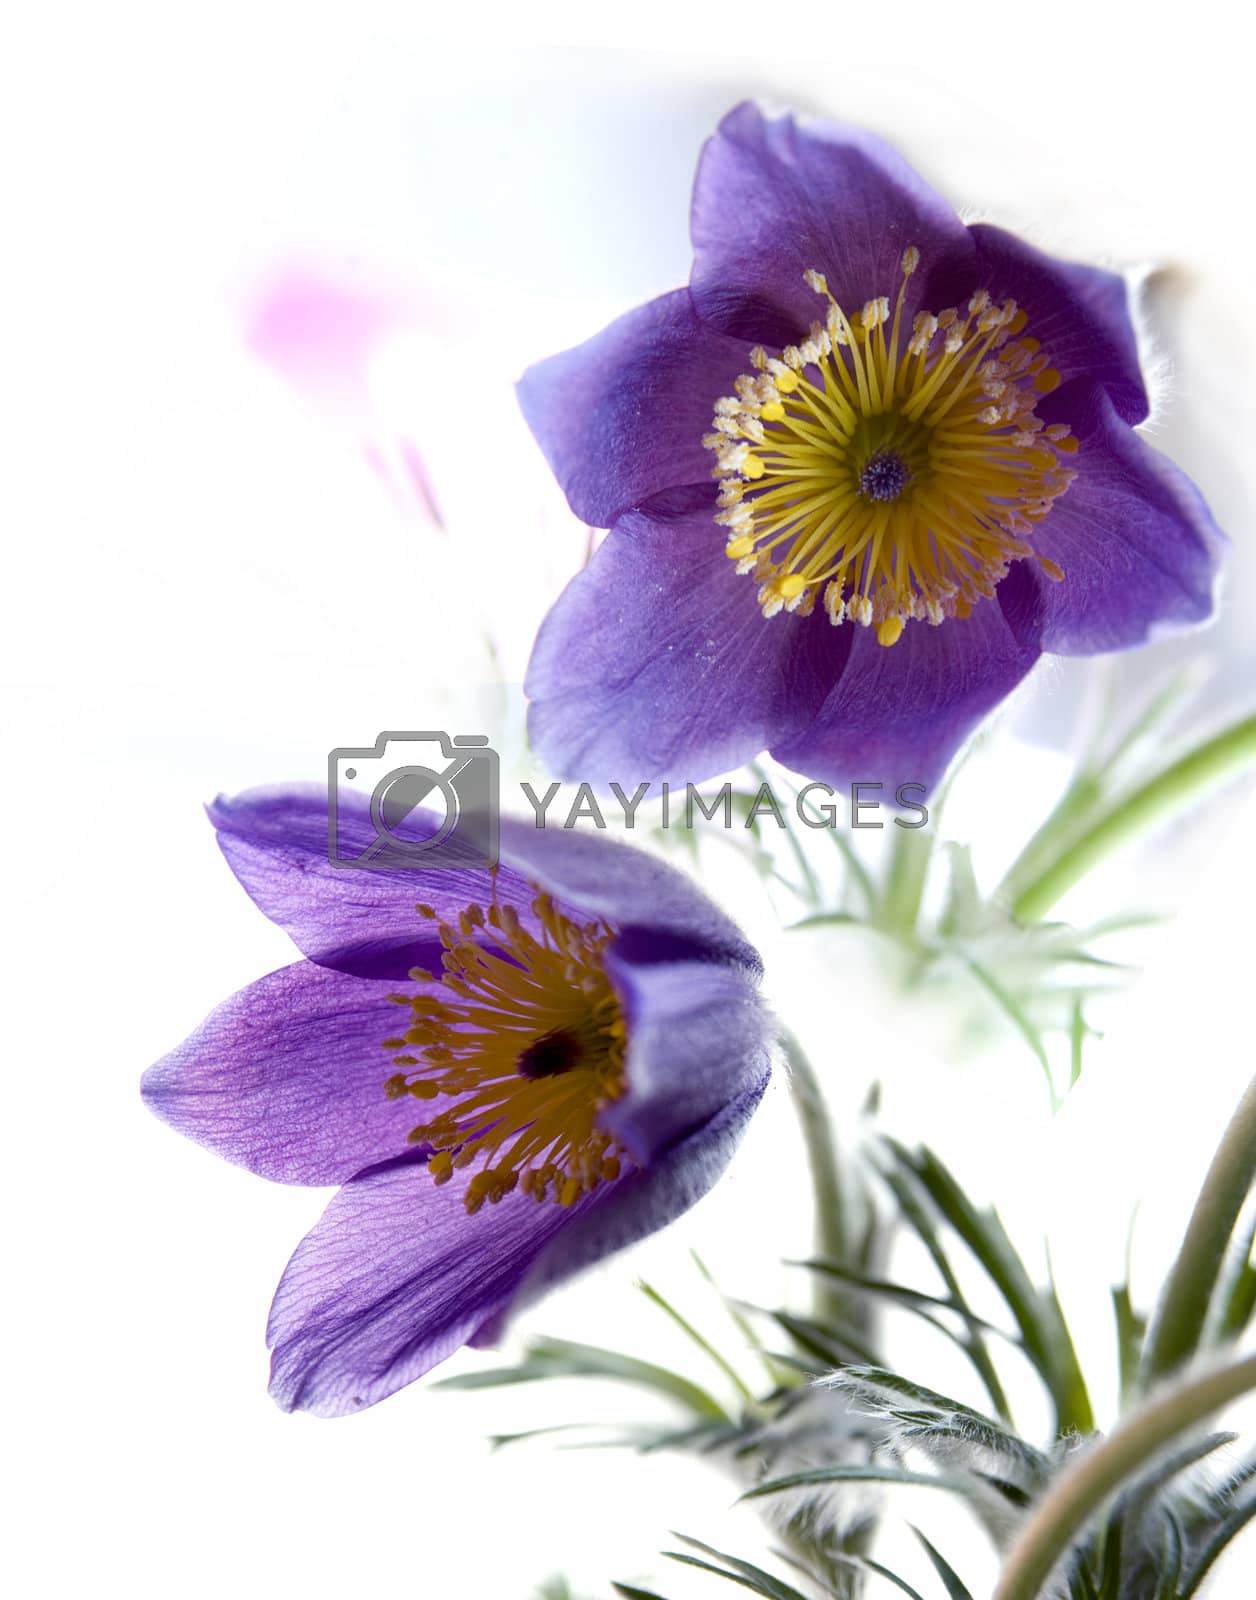 Royalty free image of pasque-flower close-up by efka